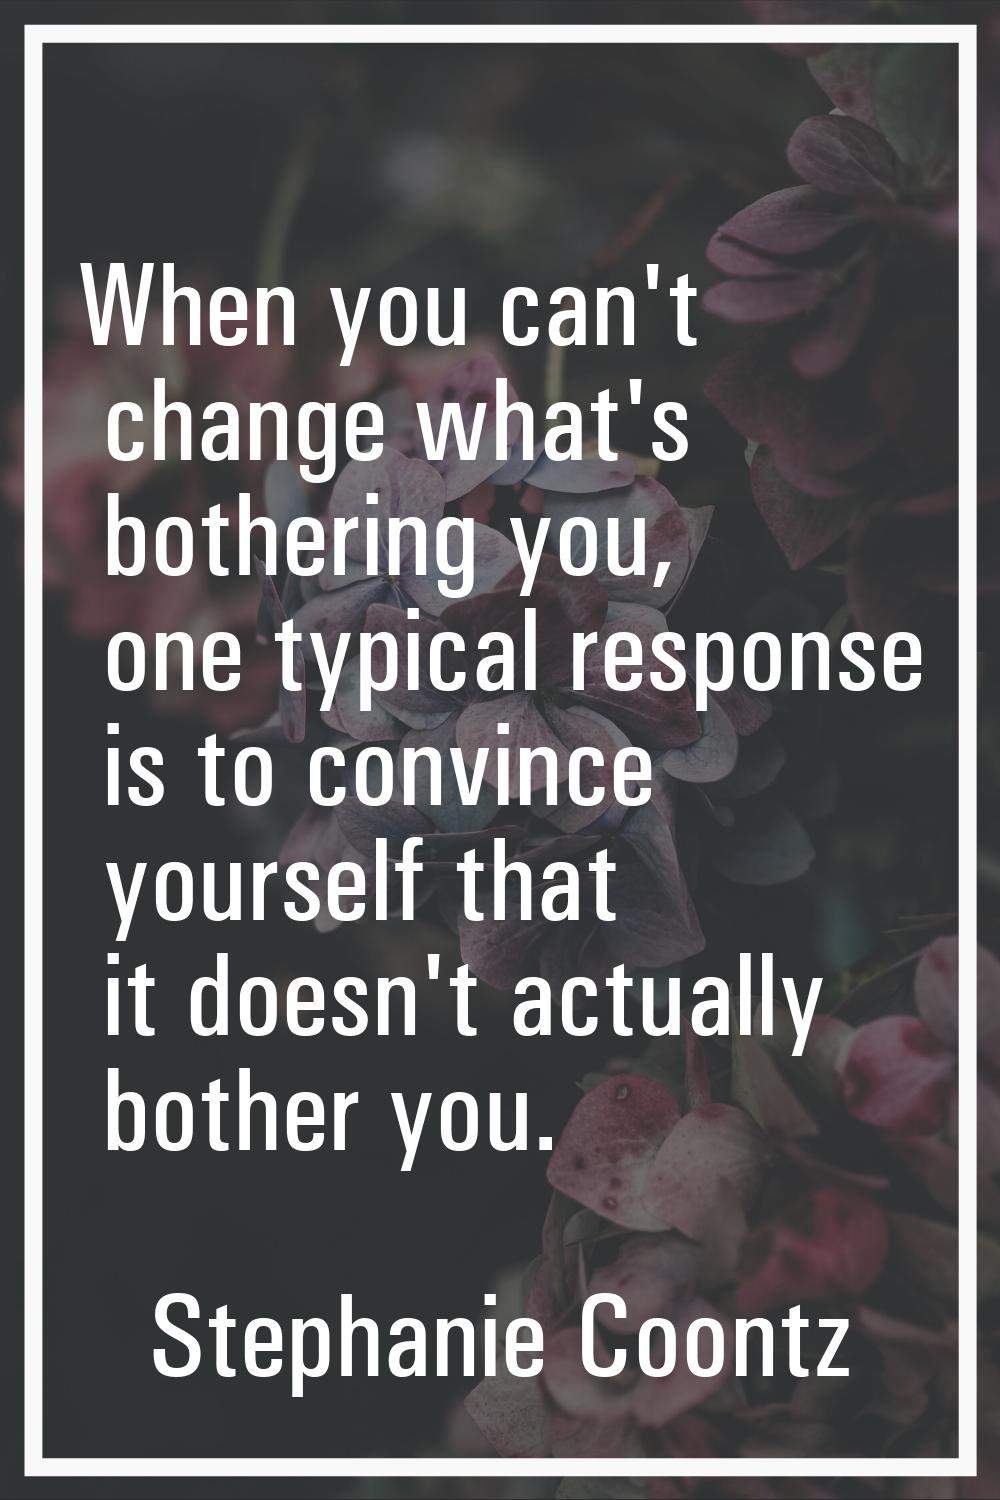 When you can't change what's bothering you, one typical response is to convince yourself that it do